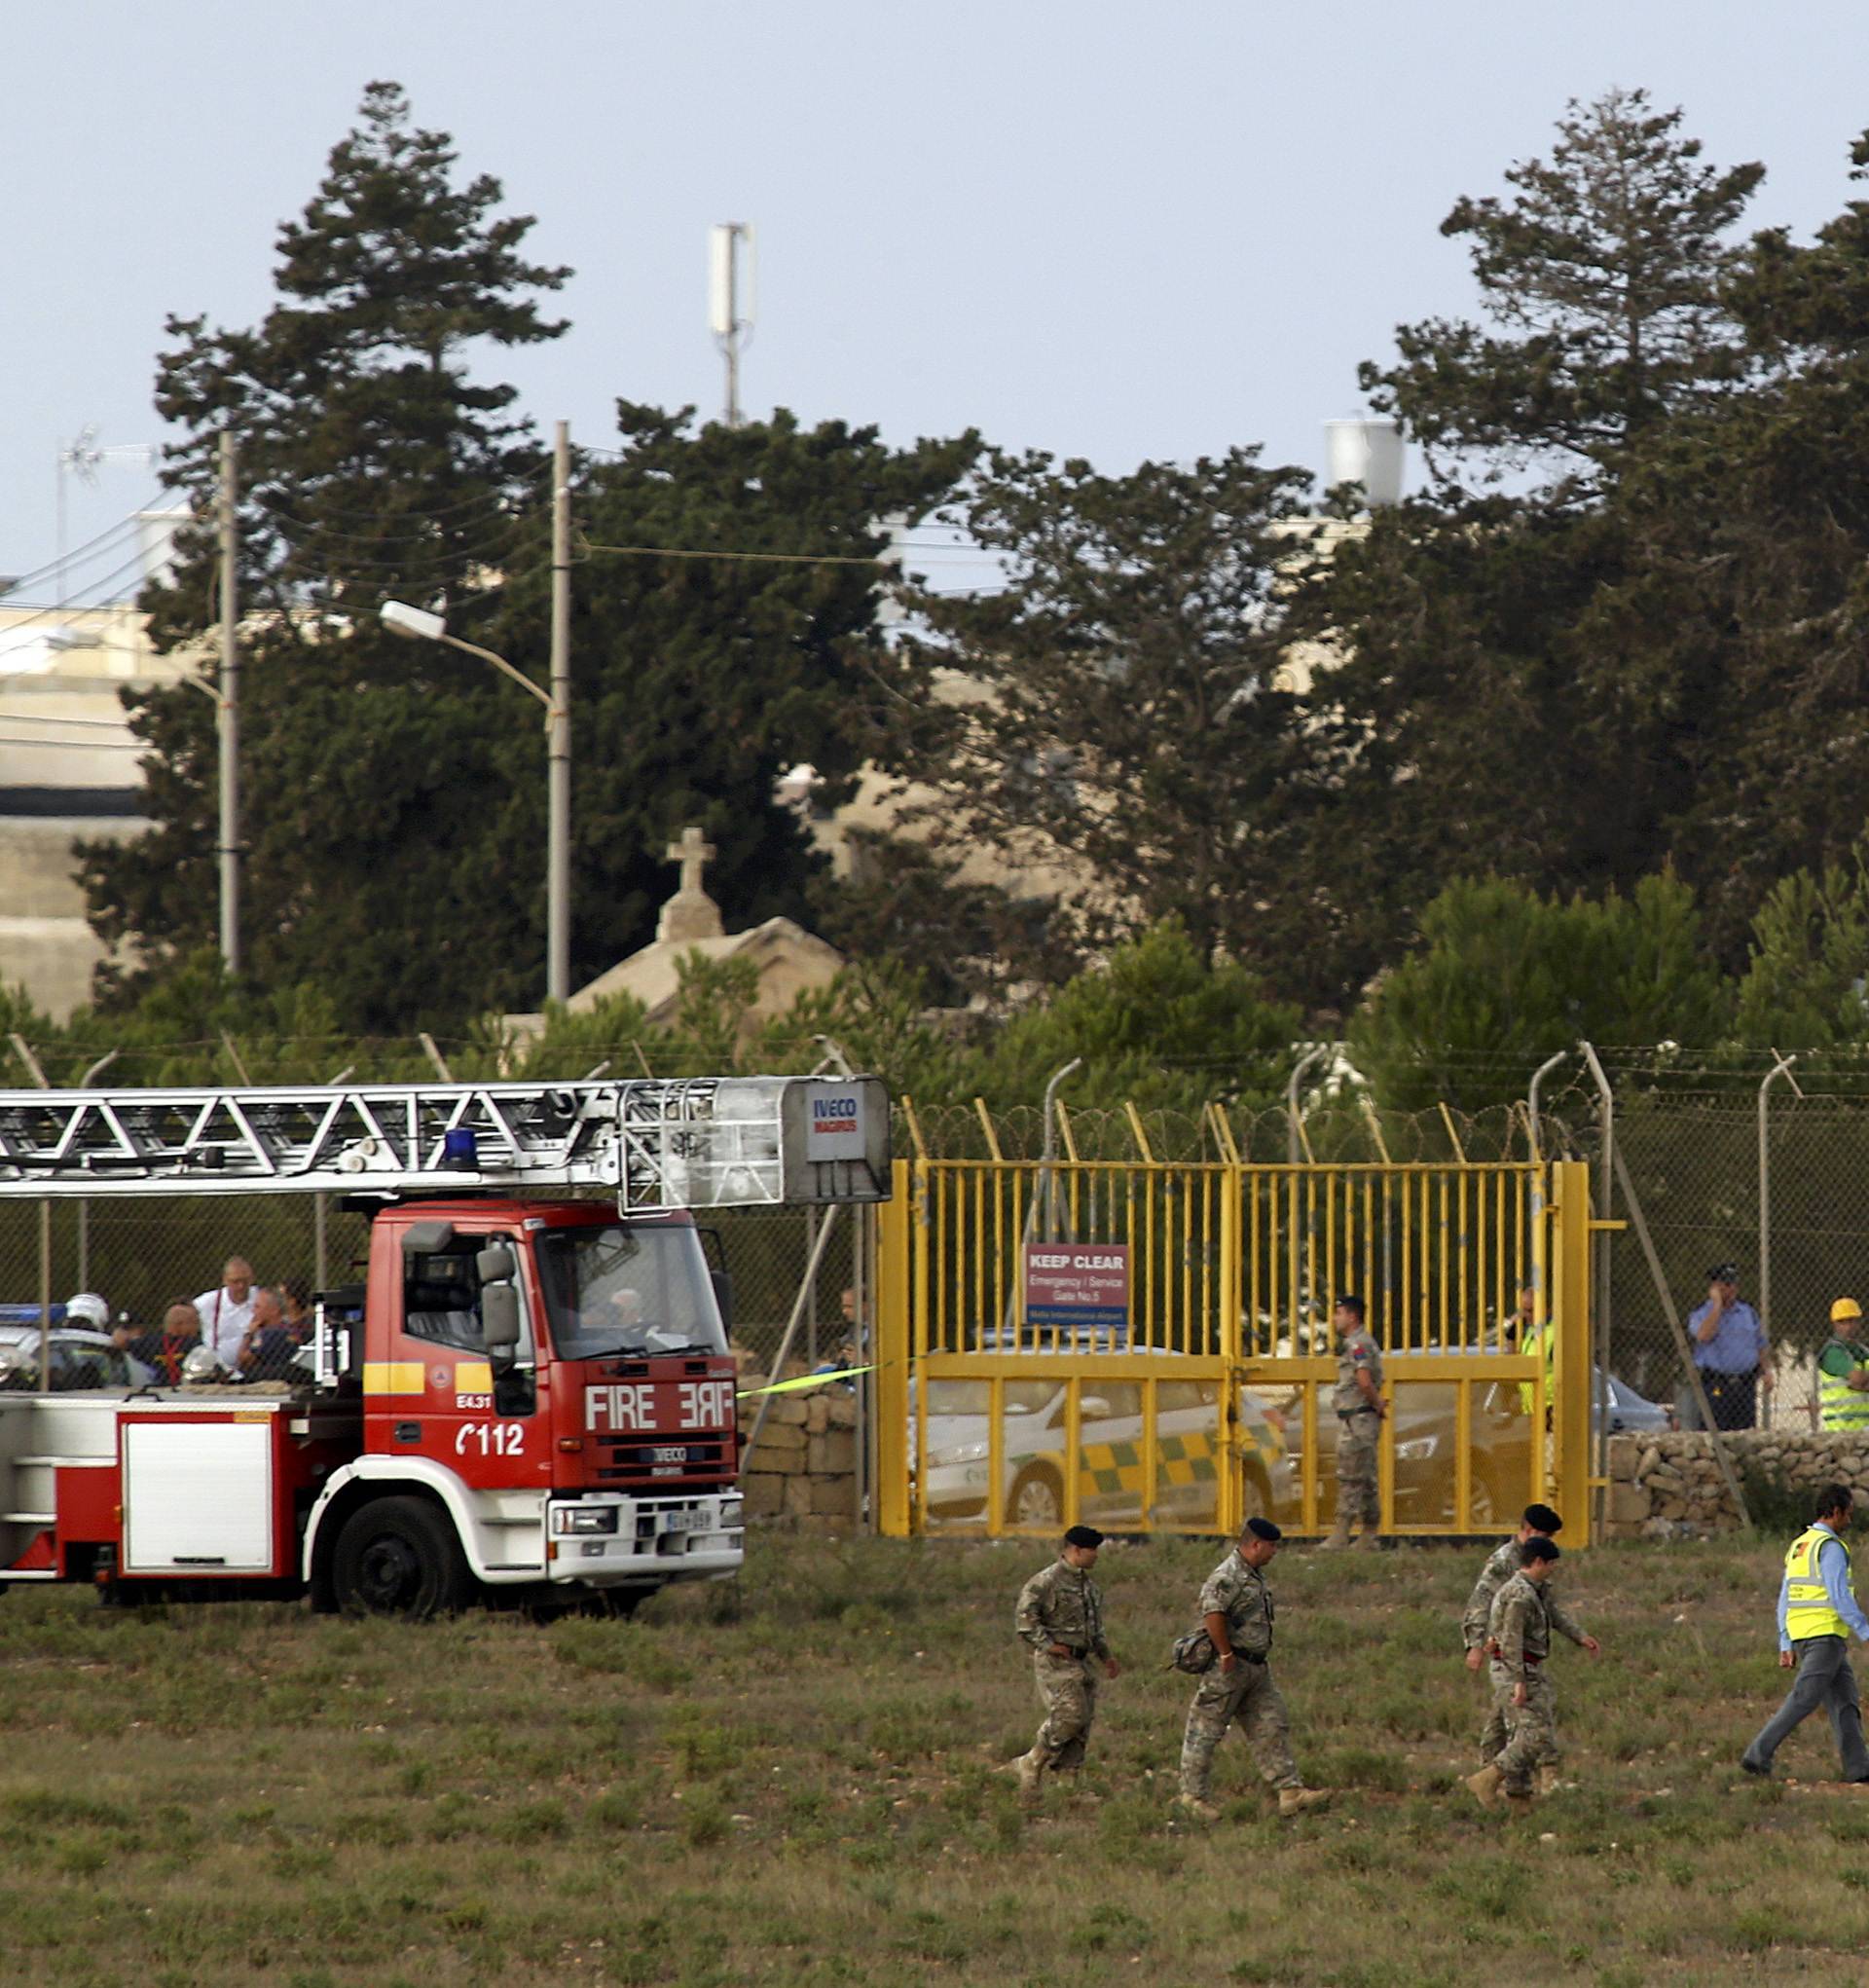 Rescue services at the scene of light aircraft crash at the airport in Malta